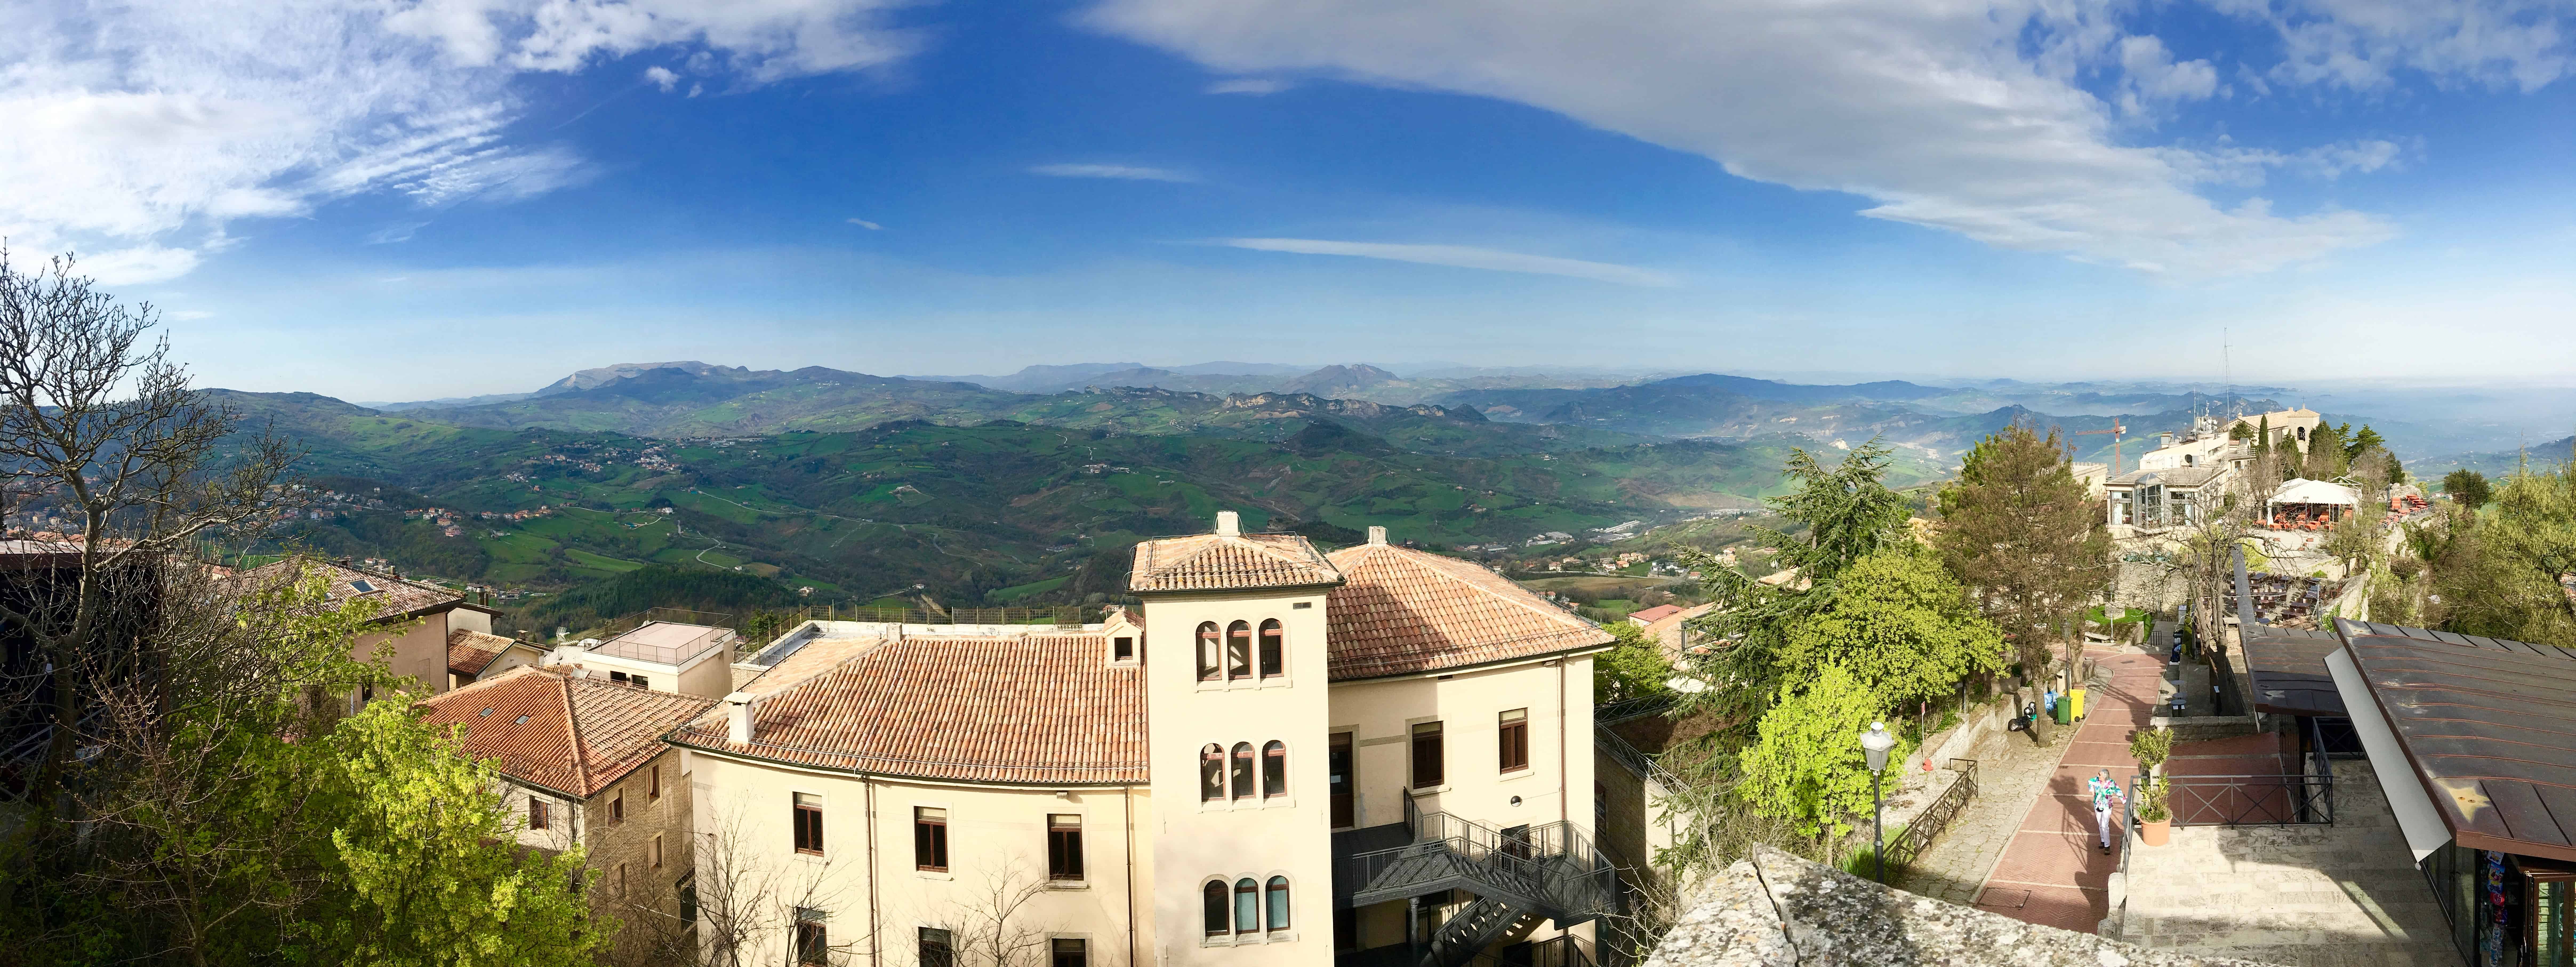 Clear Views over the Citta di San Marino and Beyond.